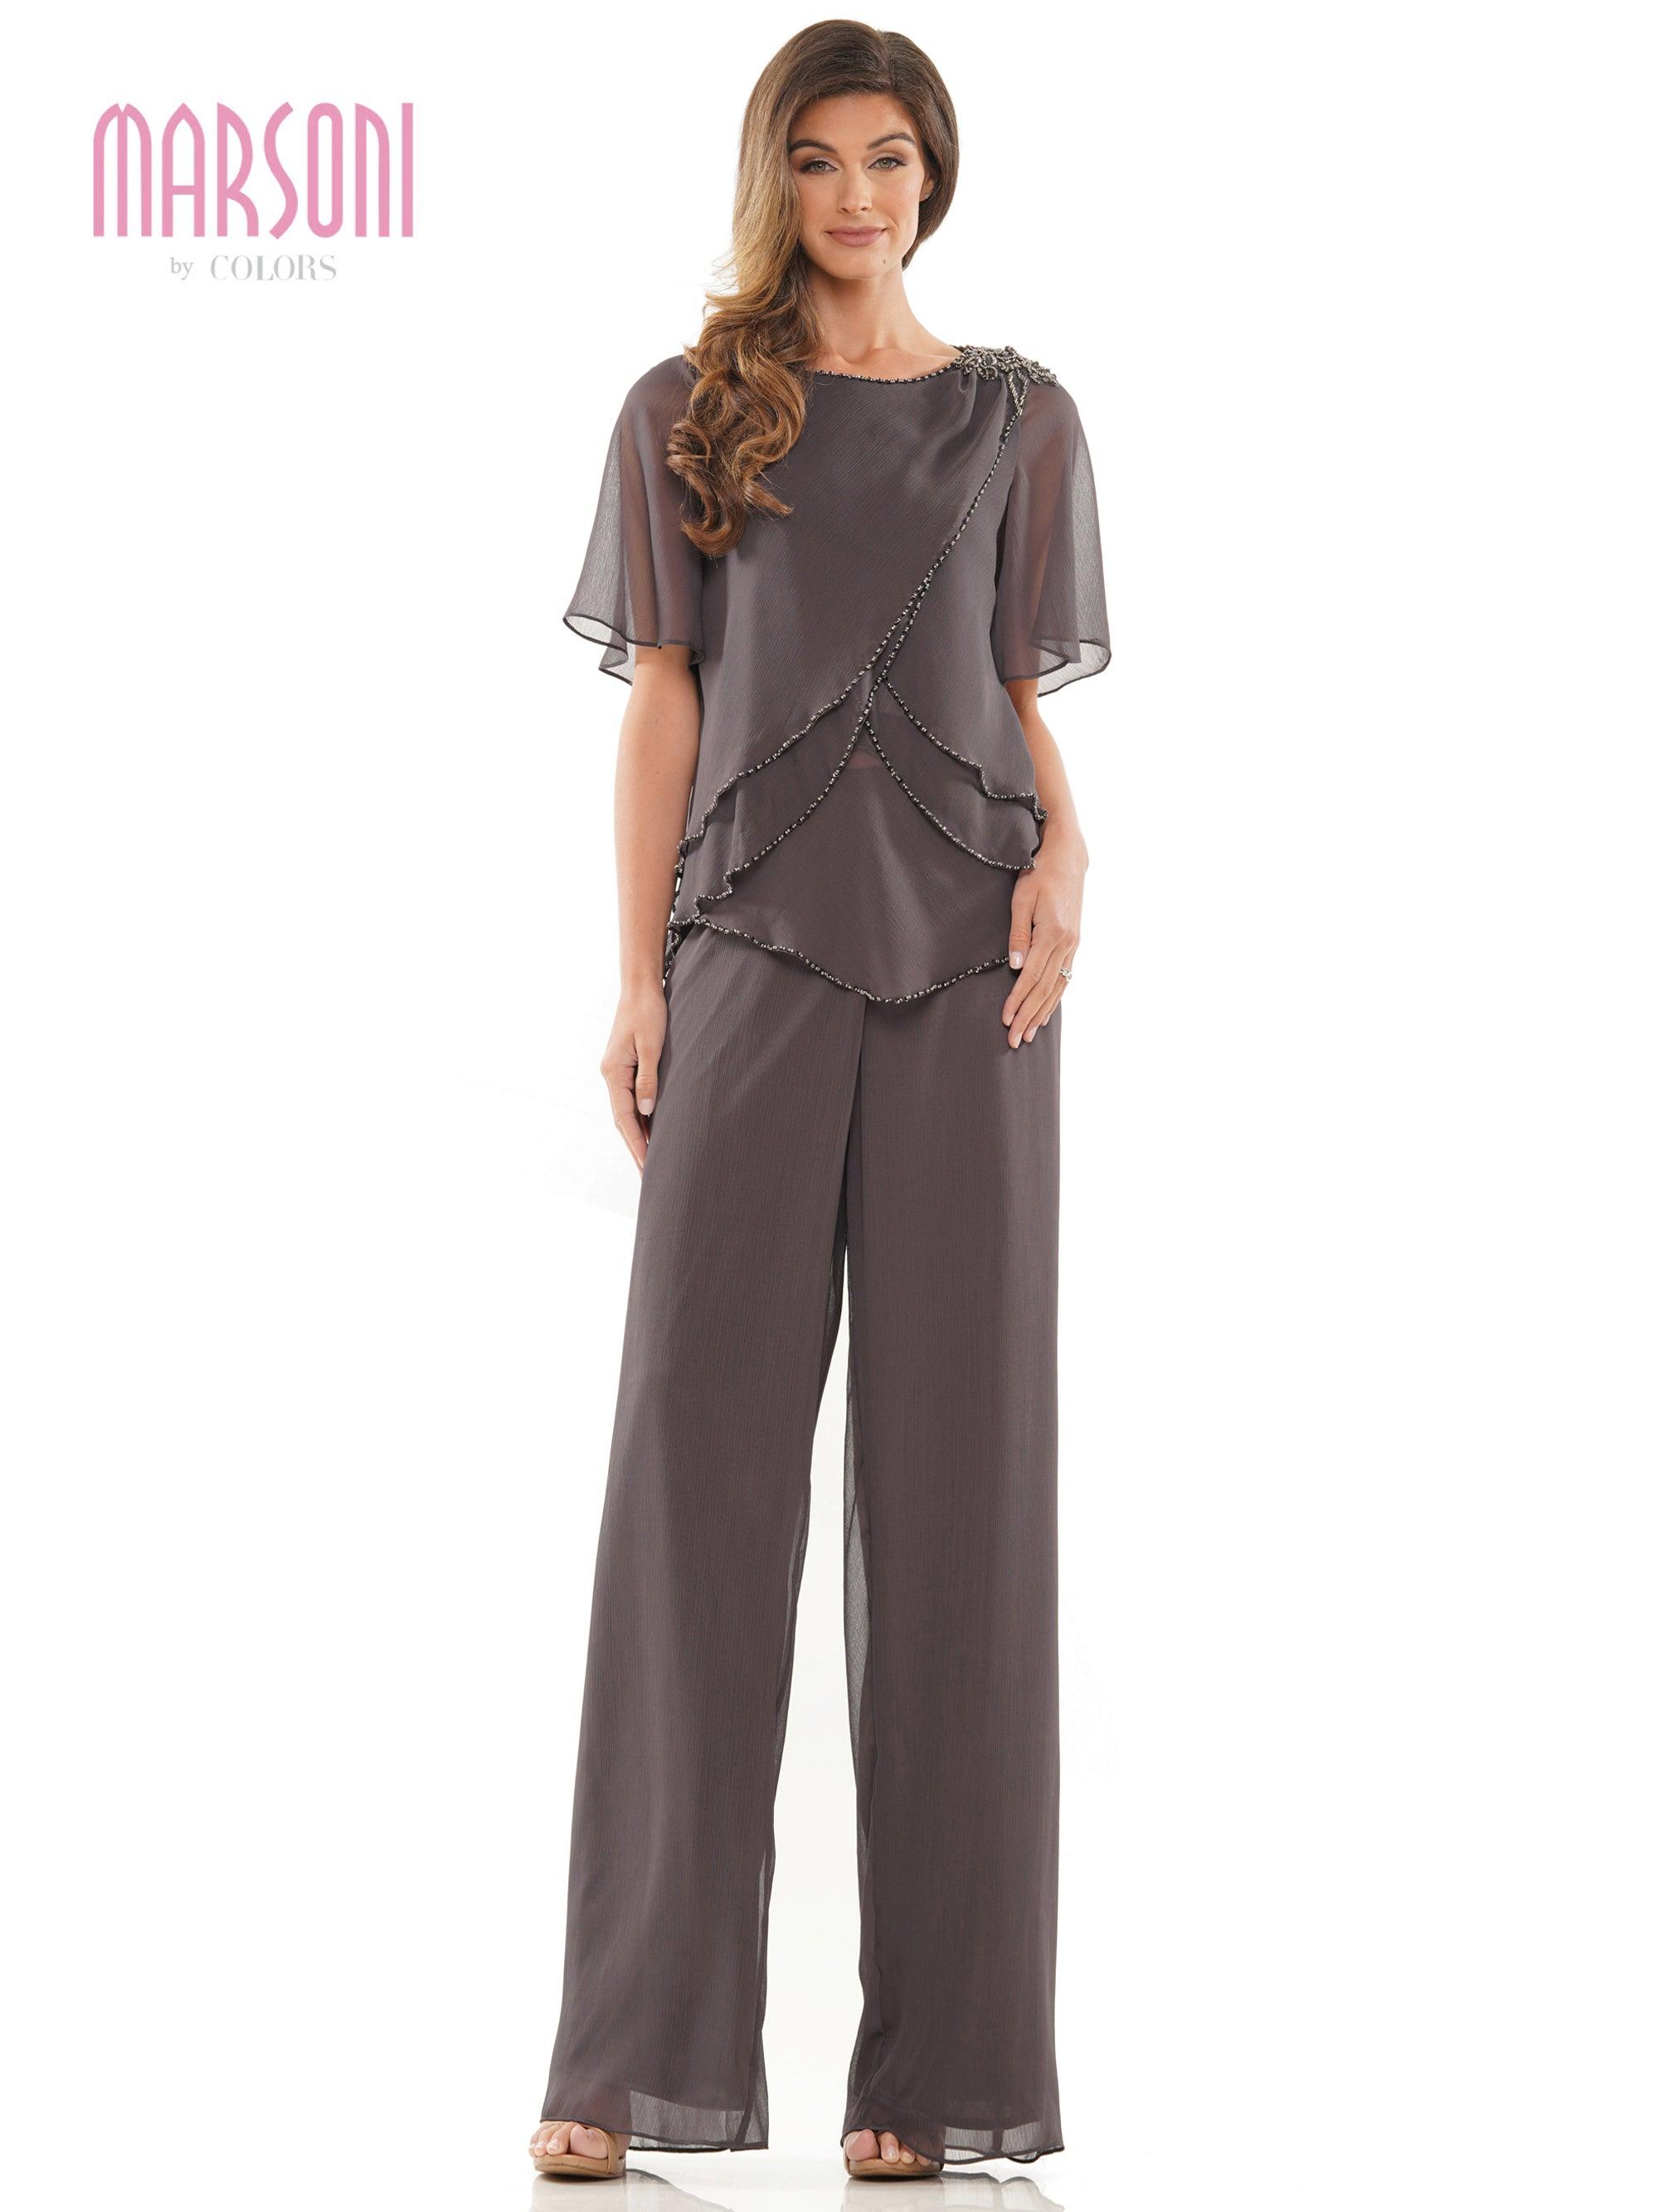 Marsoni Formal Mother of the Bride Pant Suit M321 - The Dress Outlet